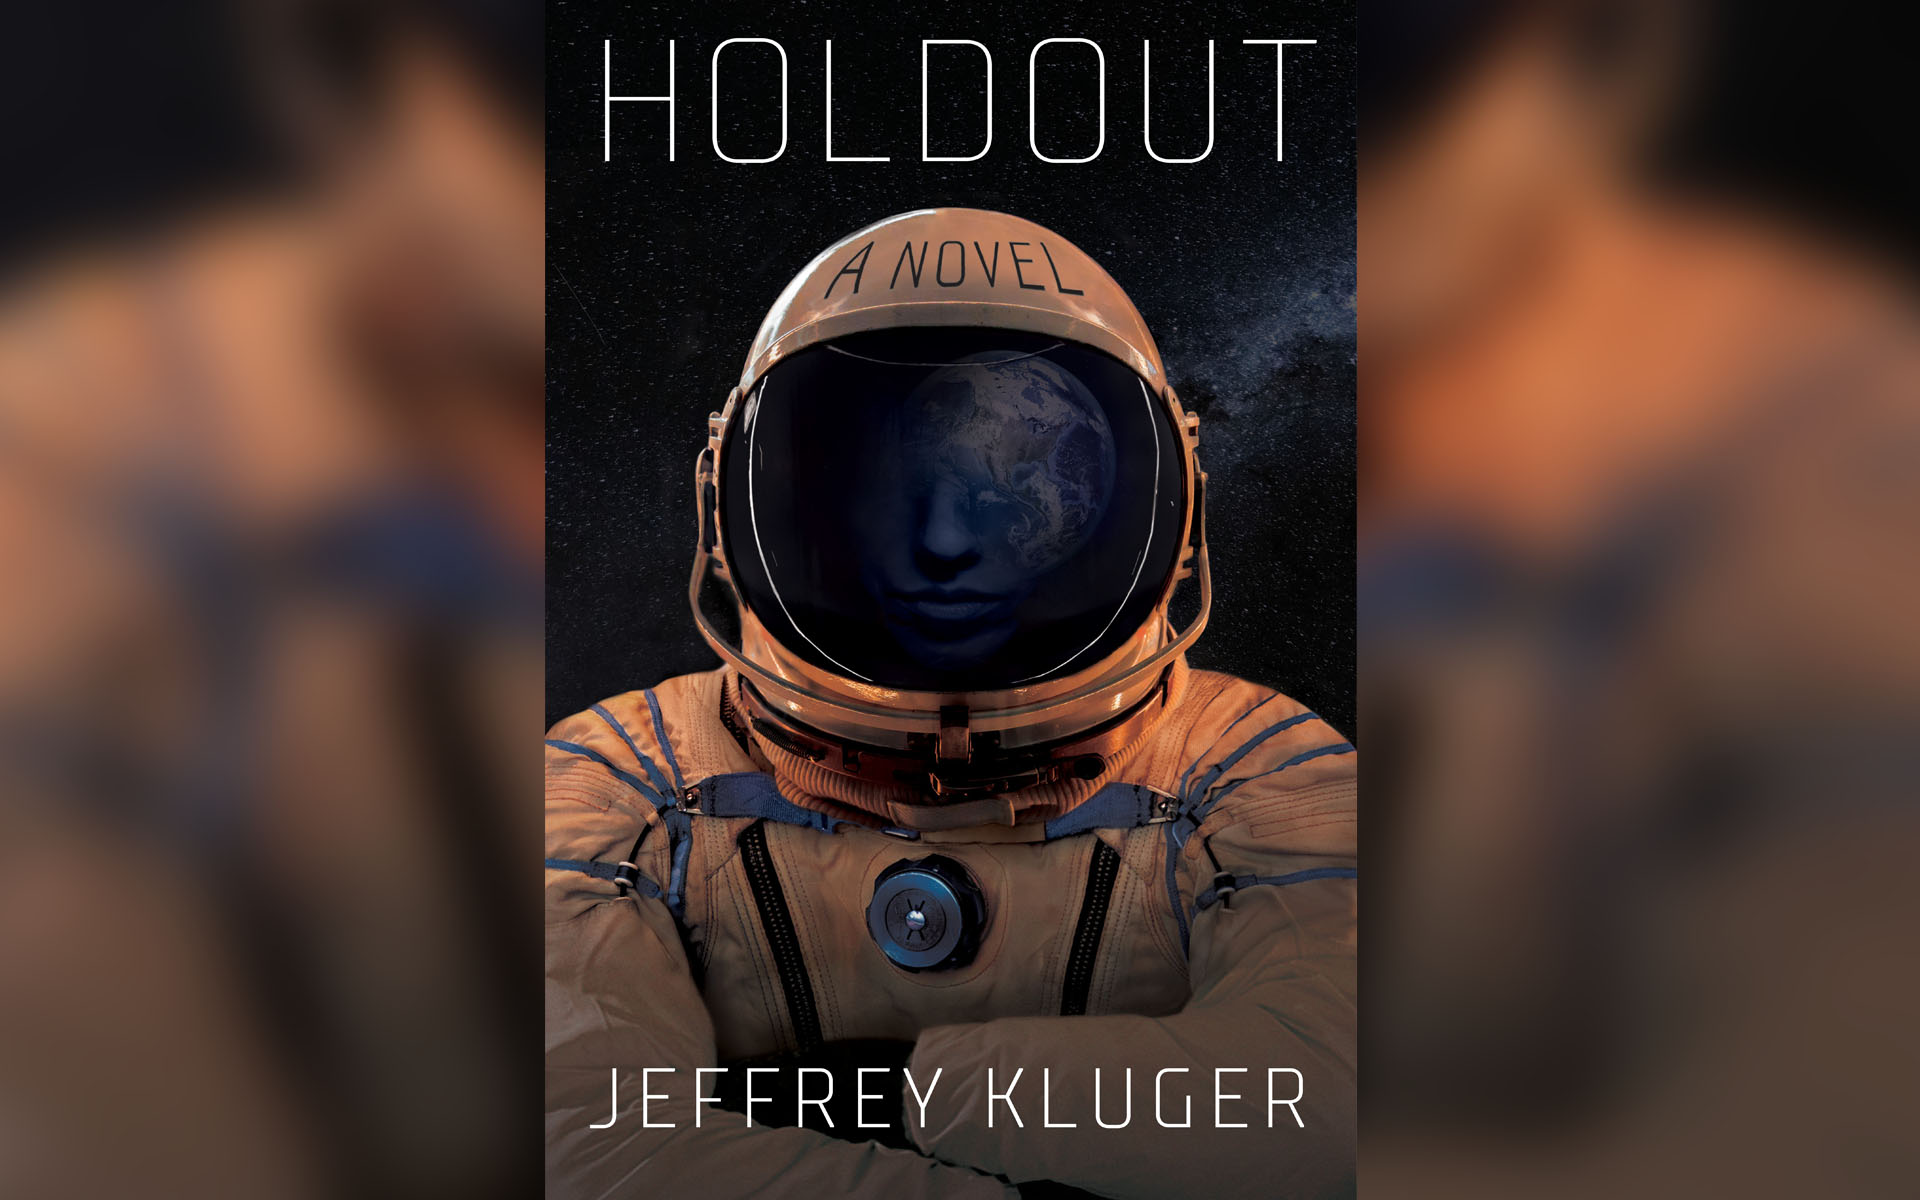 Location historical past creator Jeffrey Kluger launches digital tour for sci-fi thriller ‘Holdout’